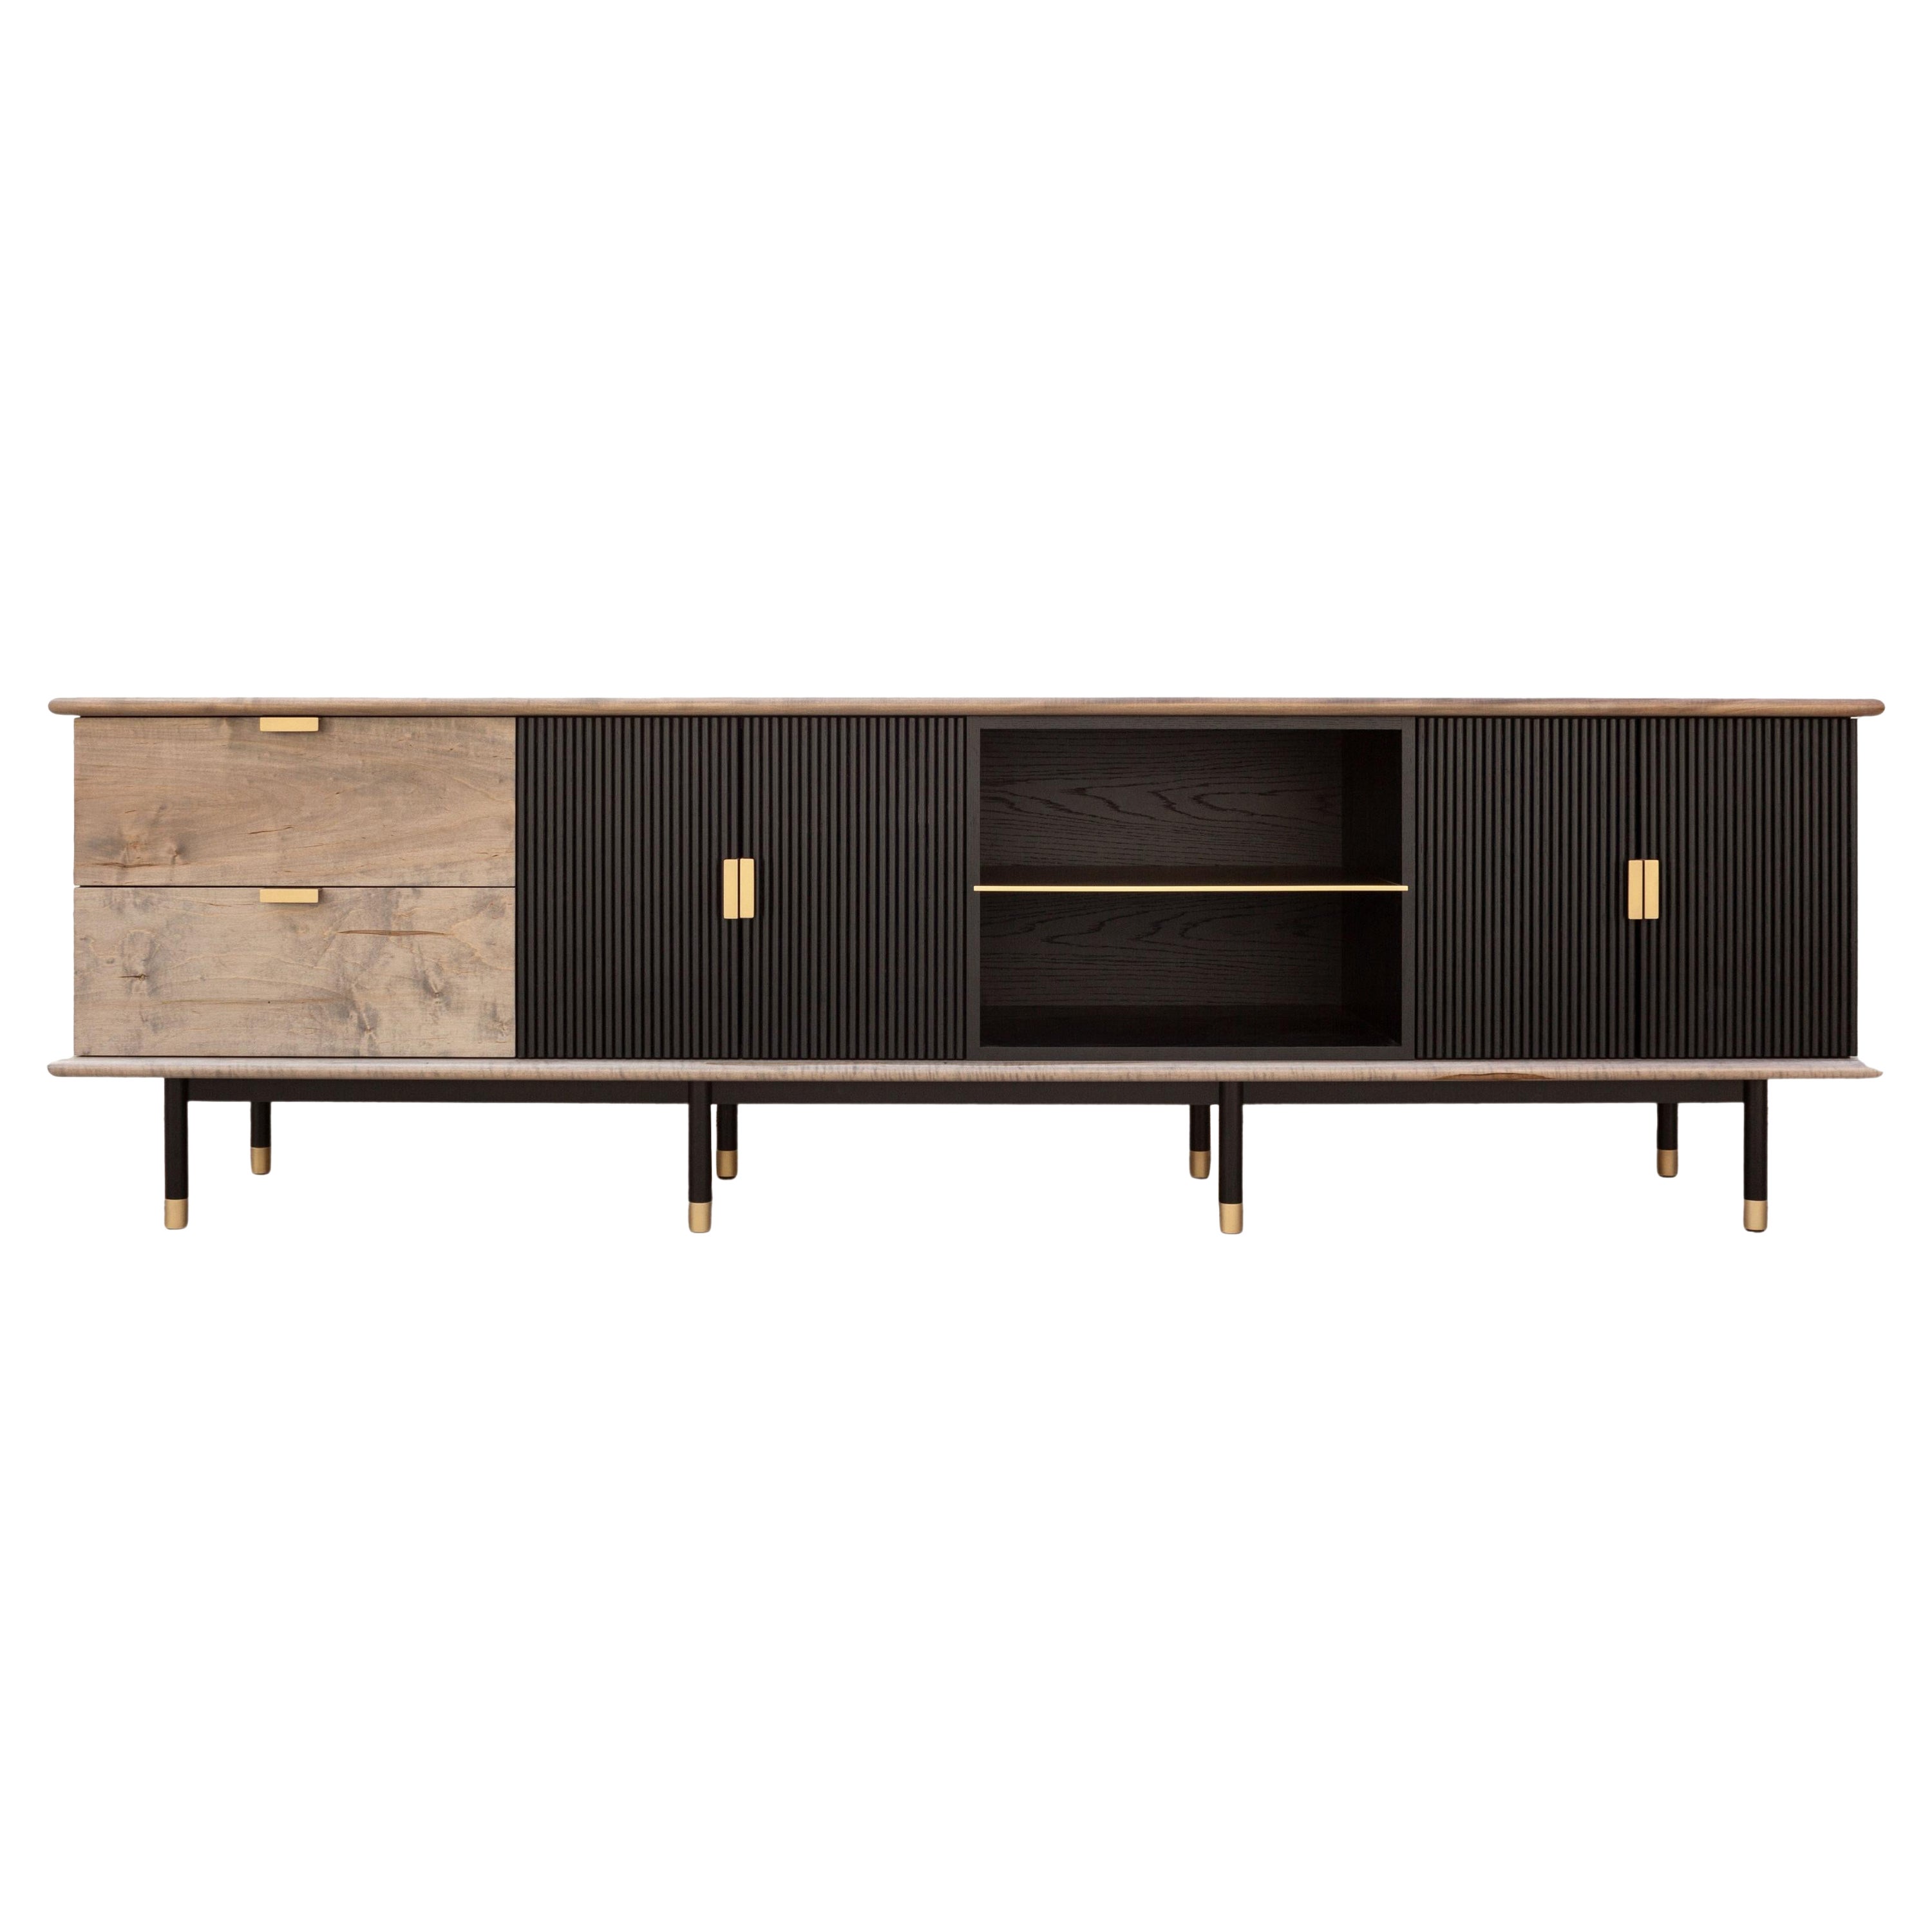 Kenmare Credenza 120", Customizable Wood and Metal